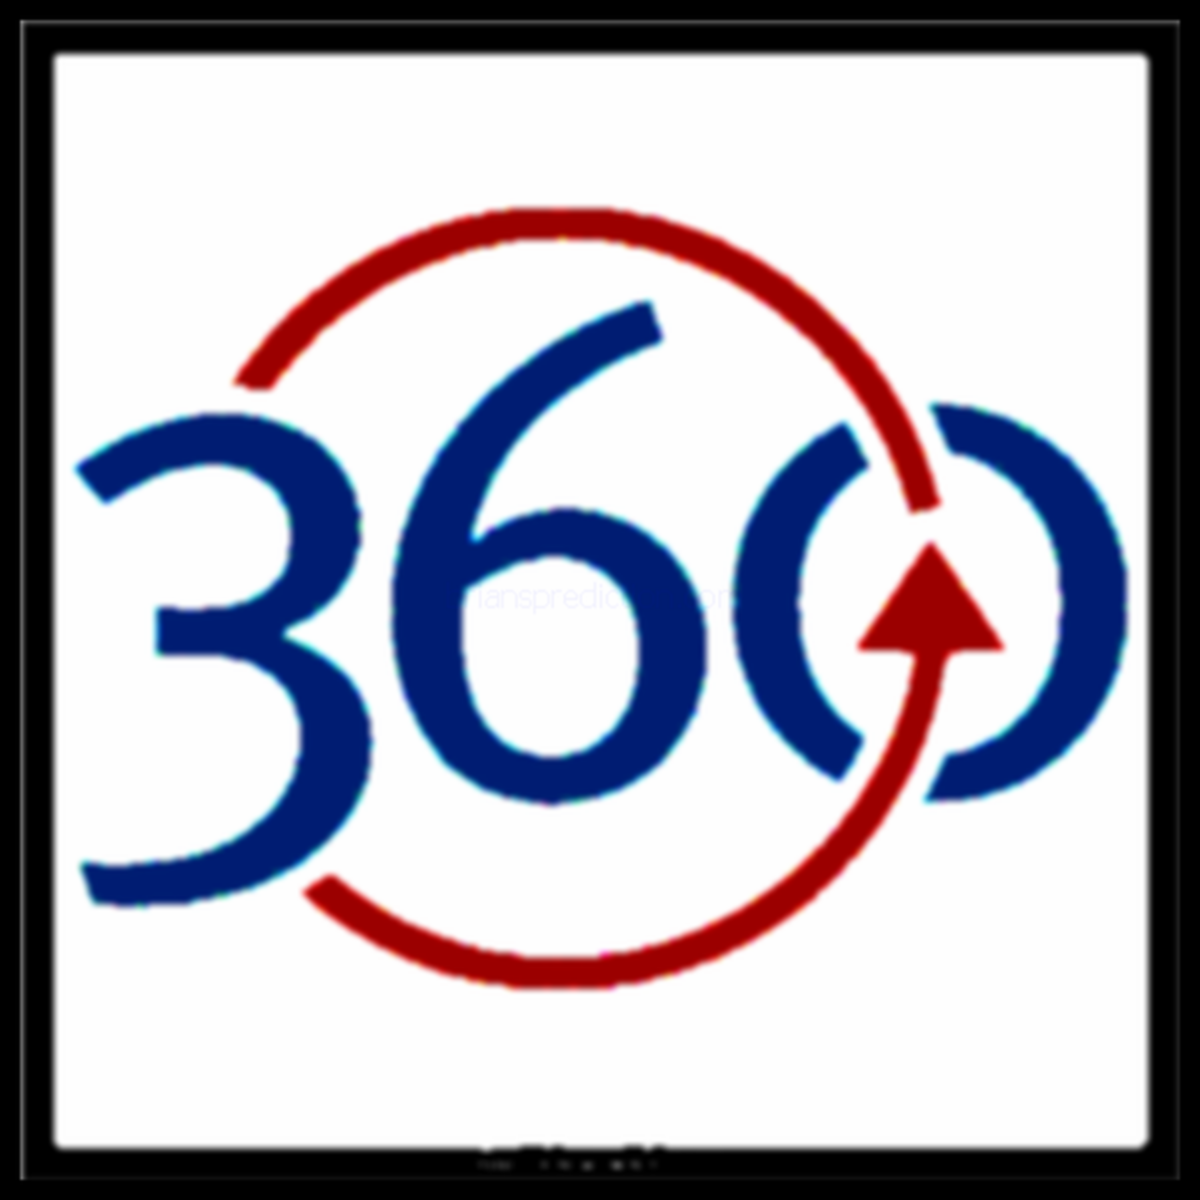 360 Matthew George Whitaker and World Patent Marketing Inc secrets you have got to see before they are pulled from the web 360    psychic Brian Ladd~0
360 Matthew George Whitaker and World Patent Marketing Inc secrets you have got to see before they are pulled from the web 360    psychic Brian Ladd~0
